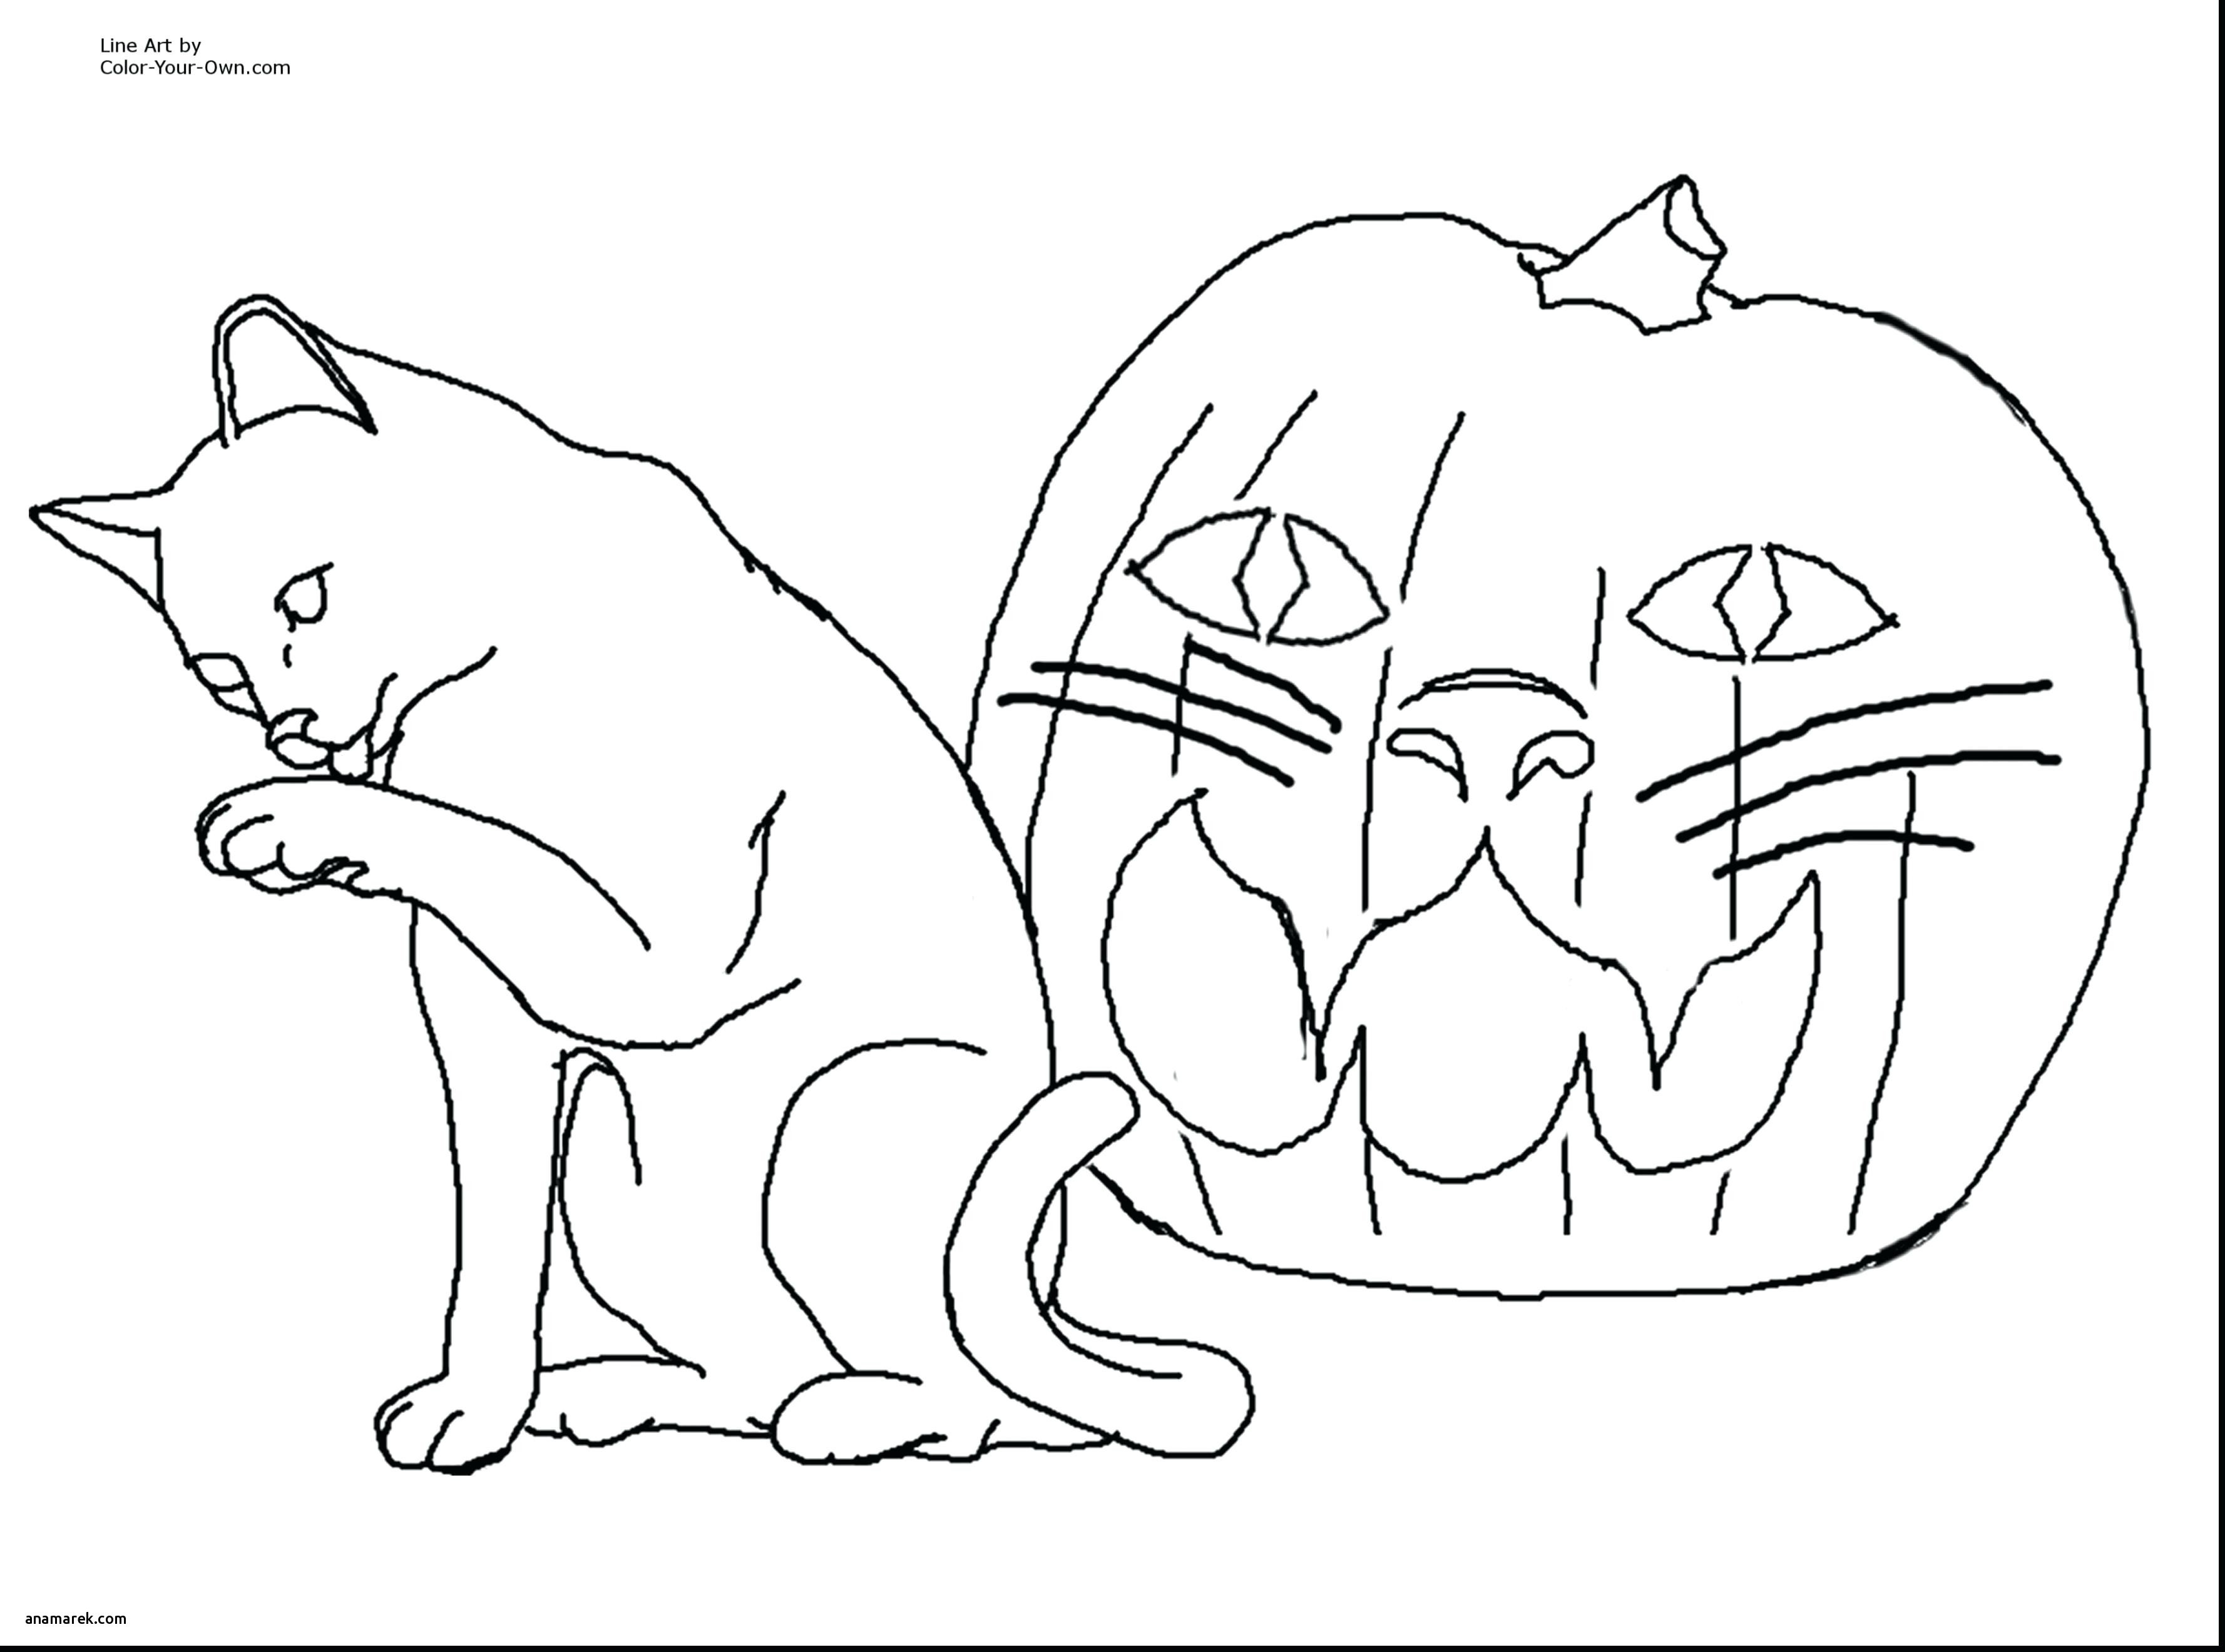 Halloween Coloring Pages Cats - BubaKids.com